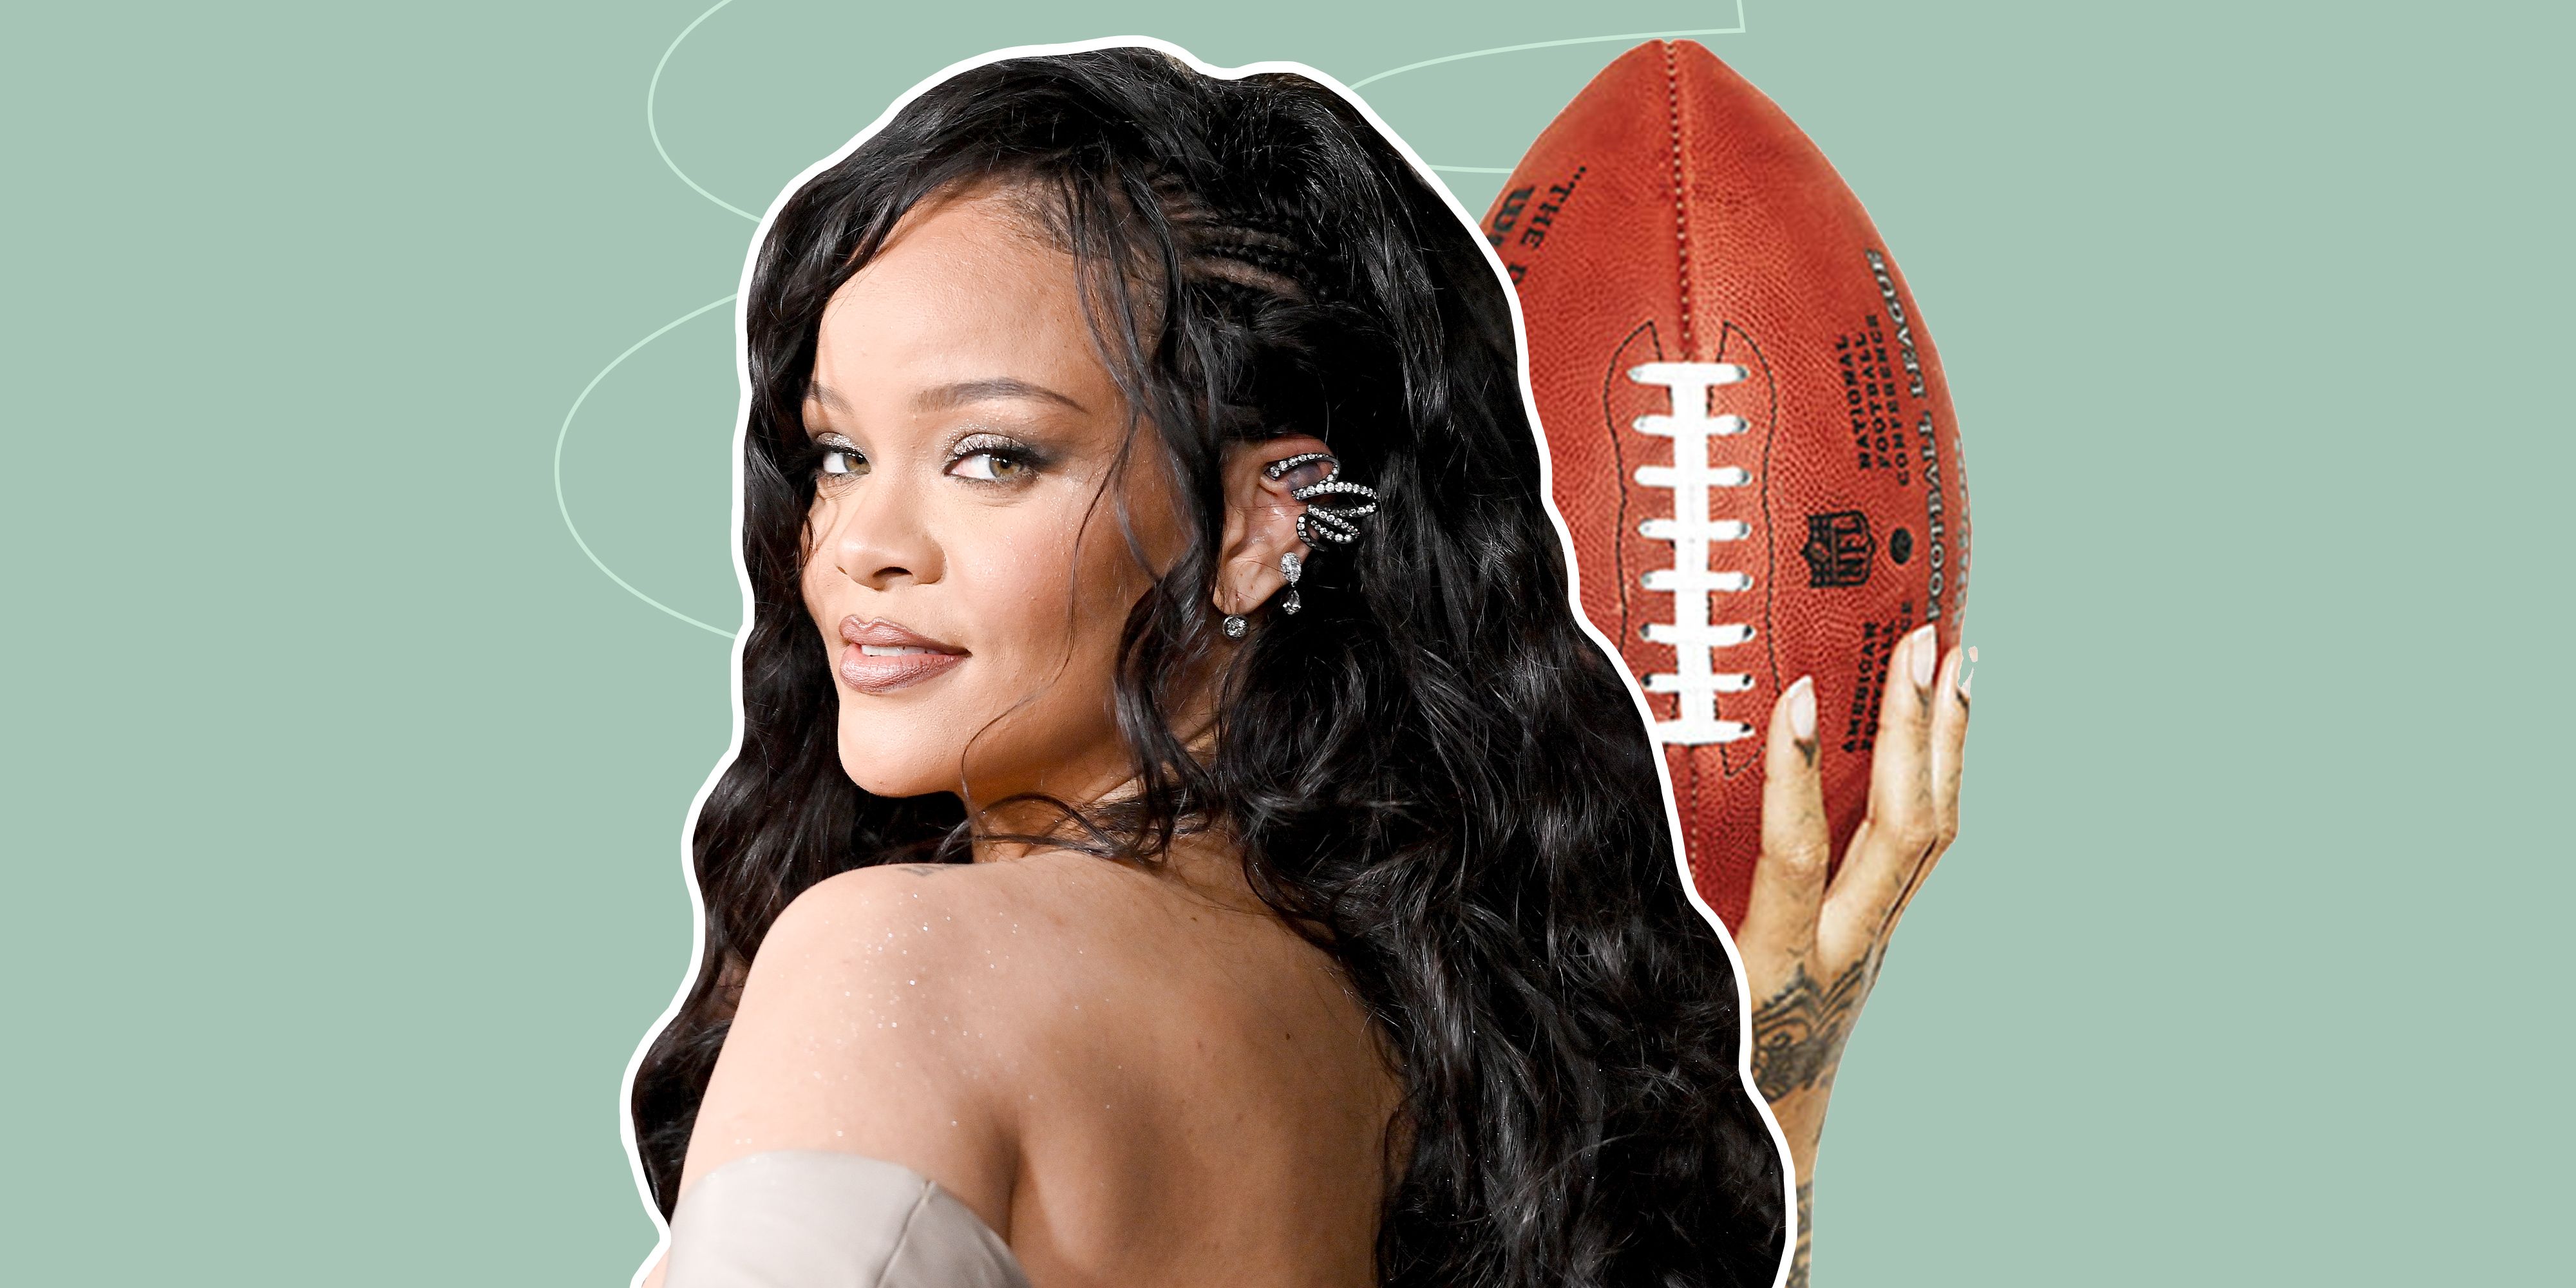 How much do Super Bowl halftime show performers get paid?